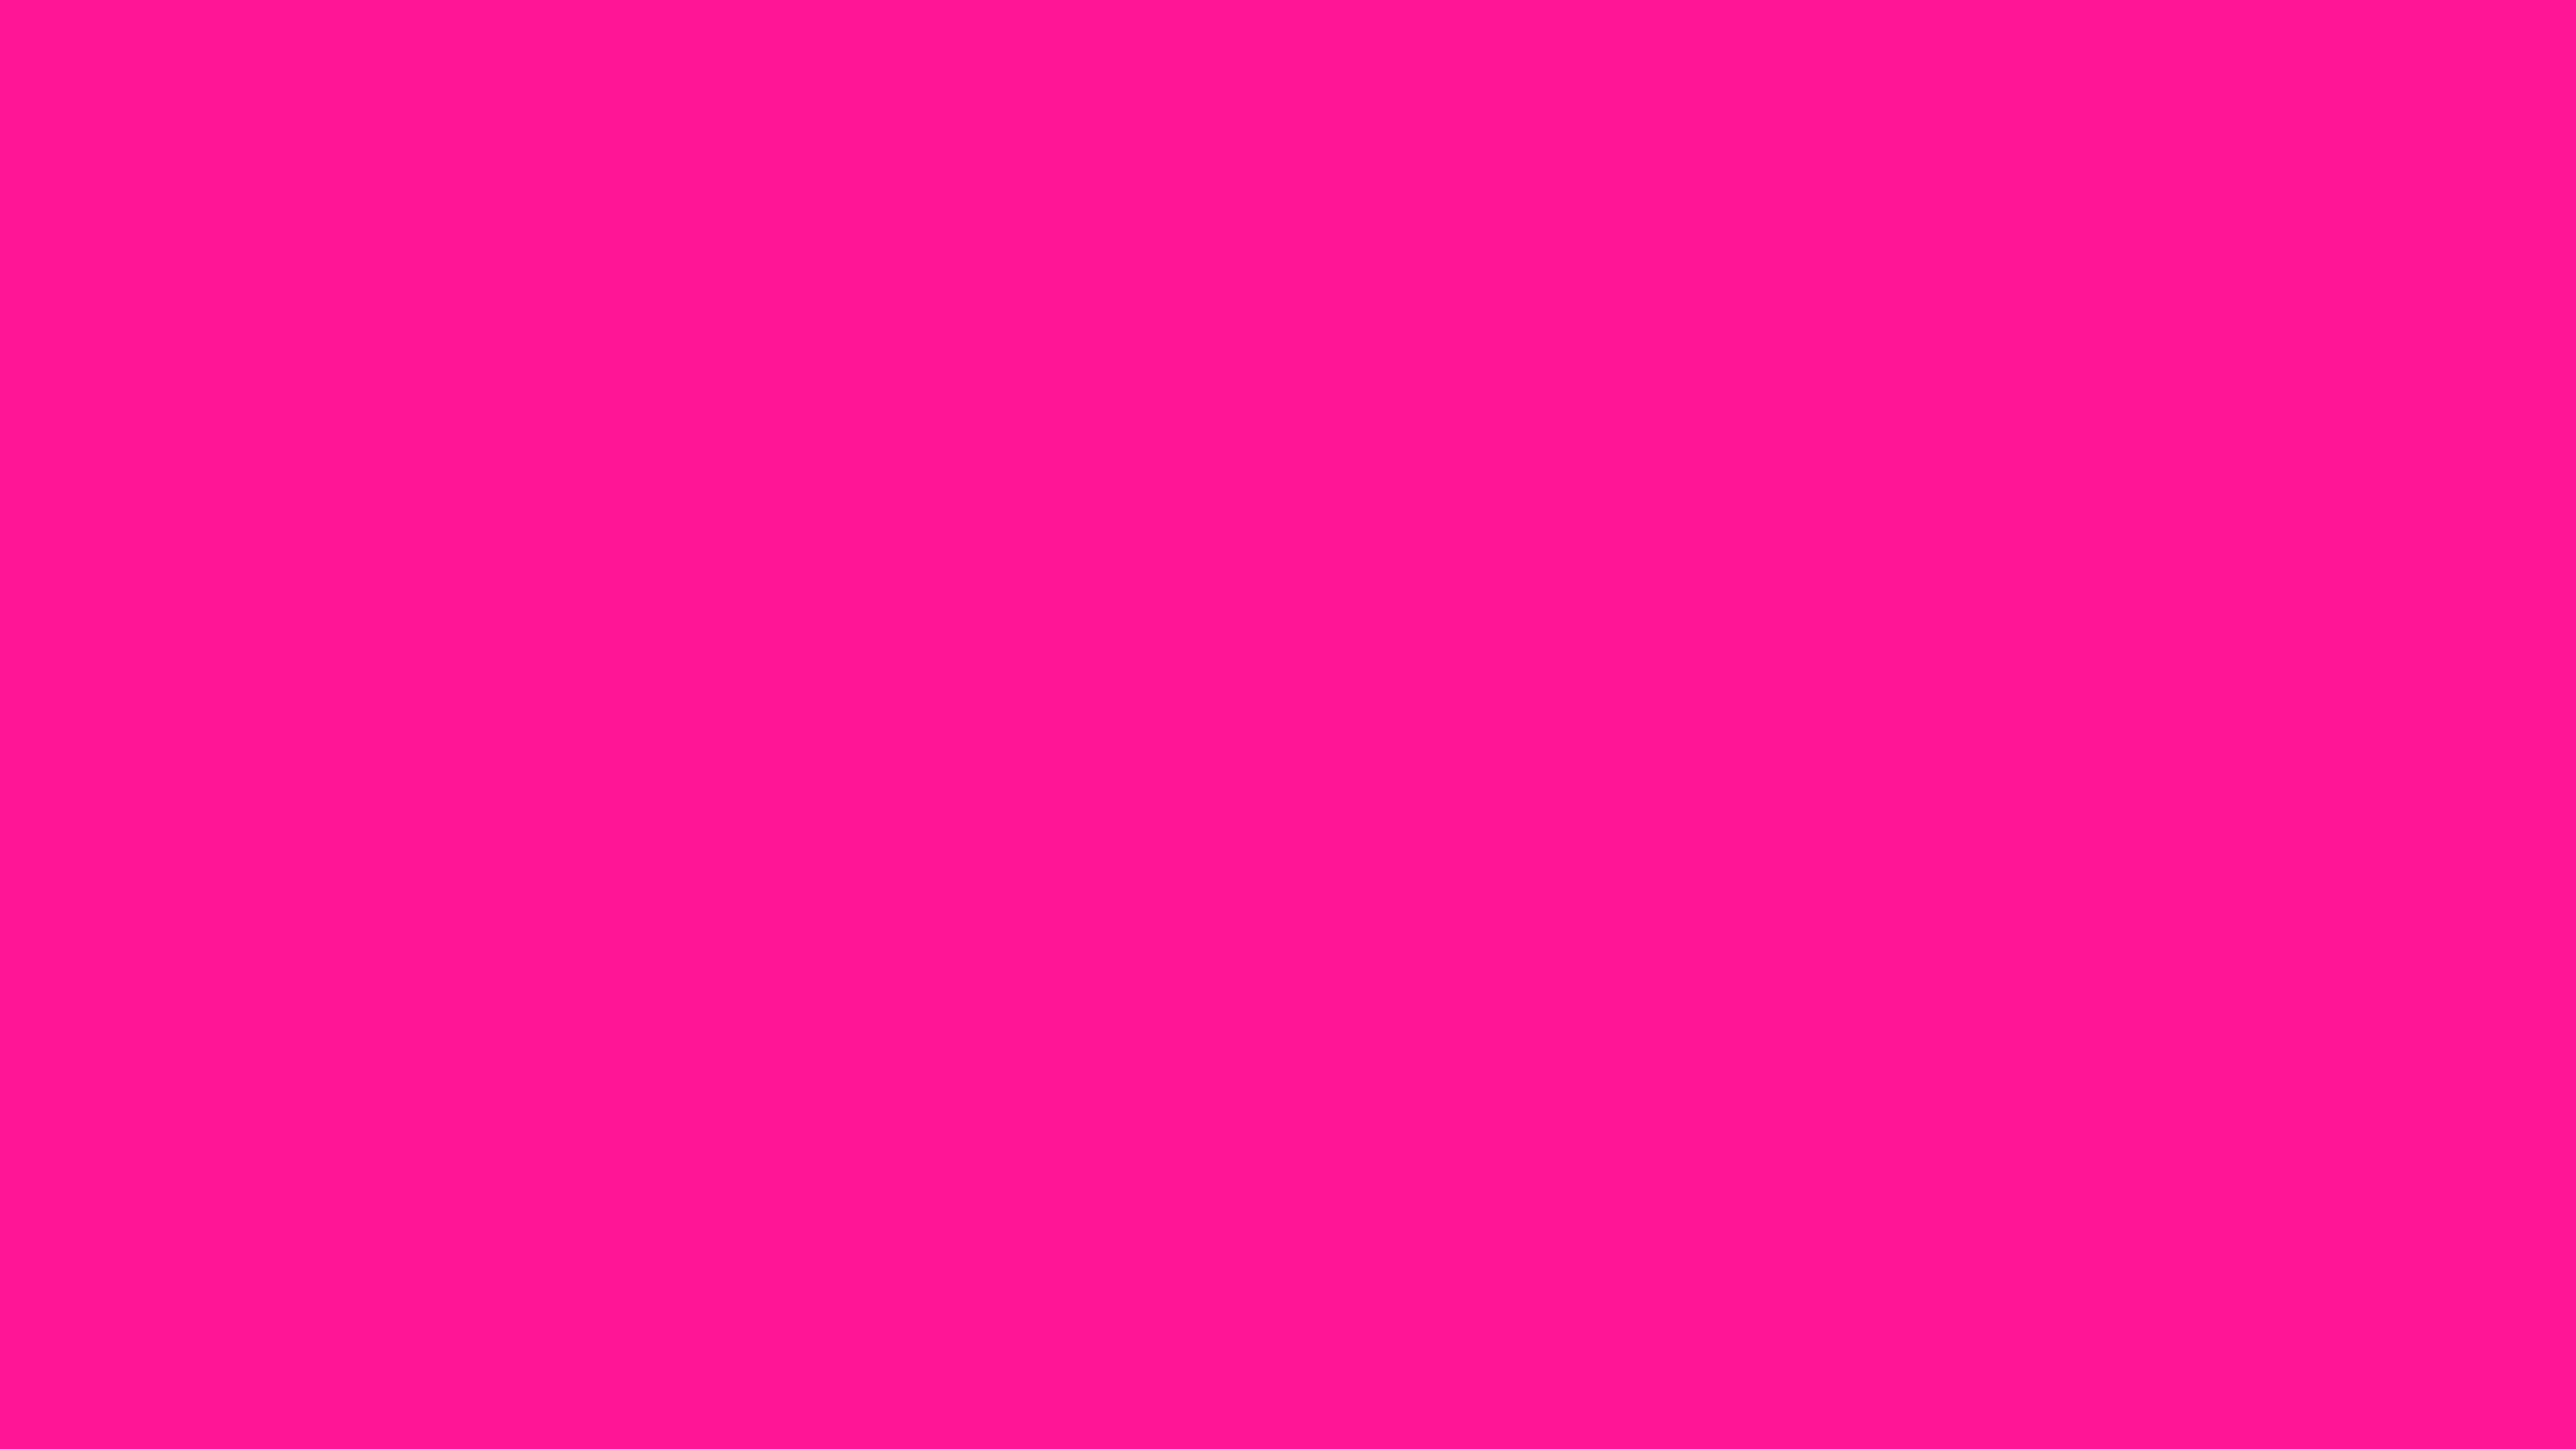 7680x4320 Fluorescent Pink Solid Color Background